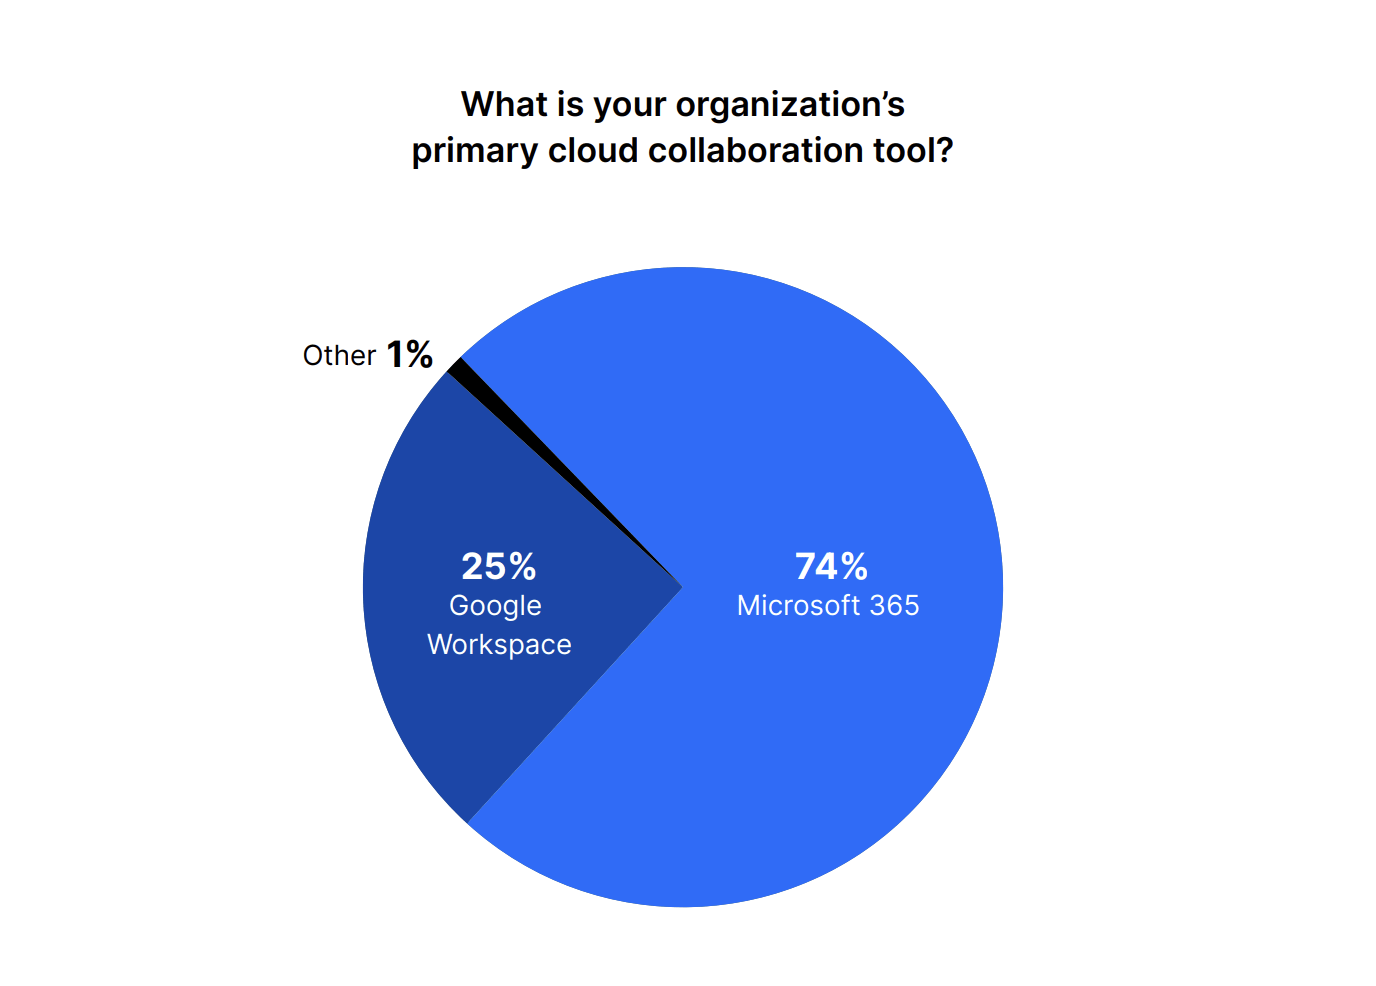 What is your organization's primary cloud collaboration tool?